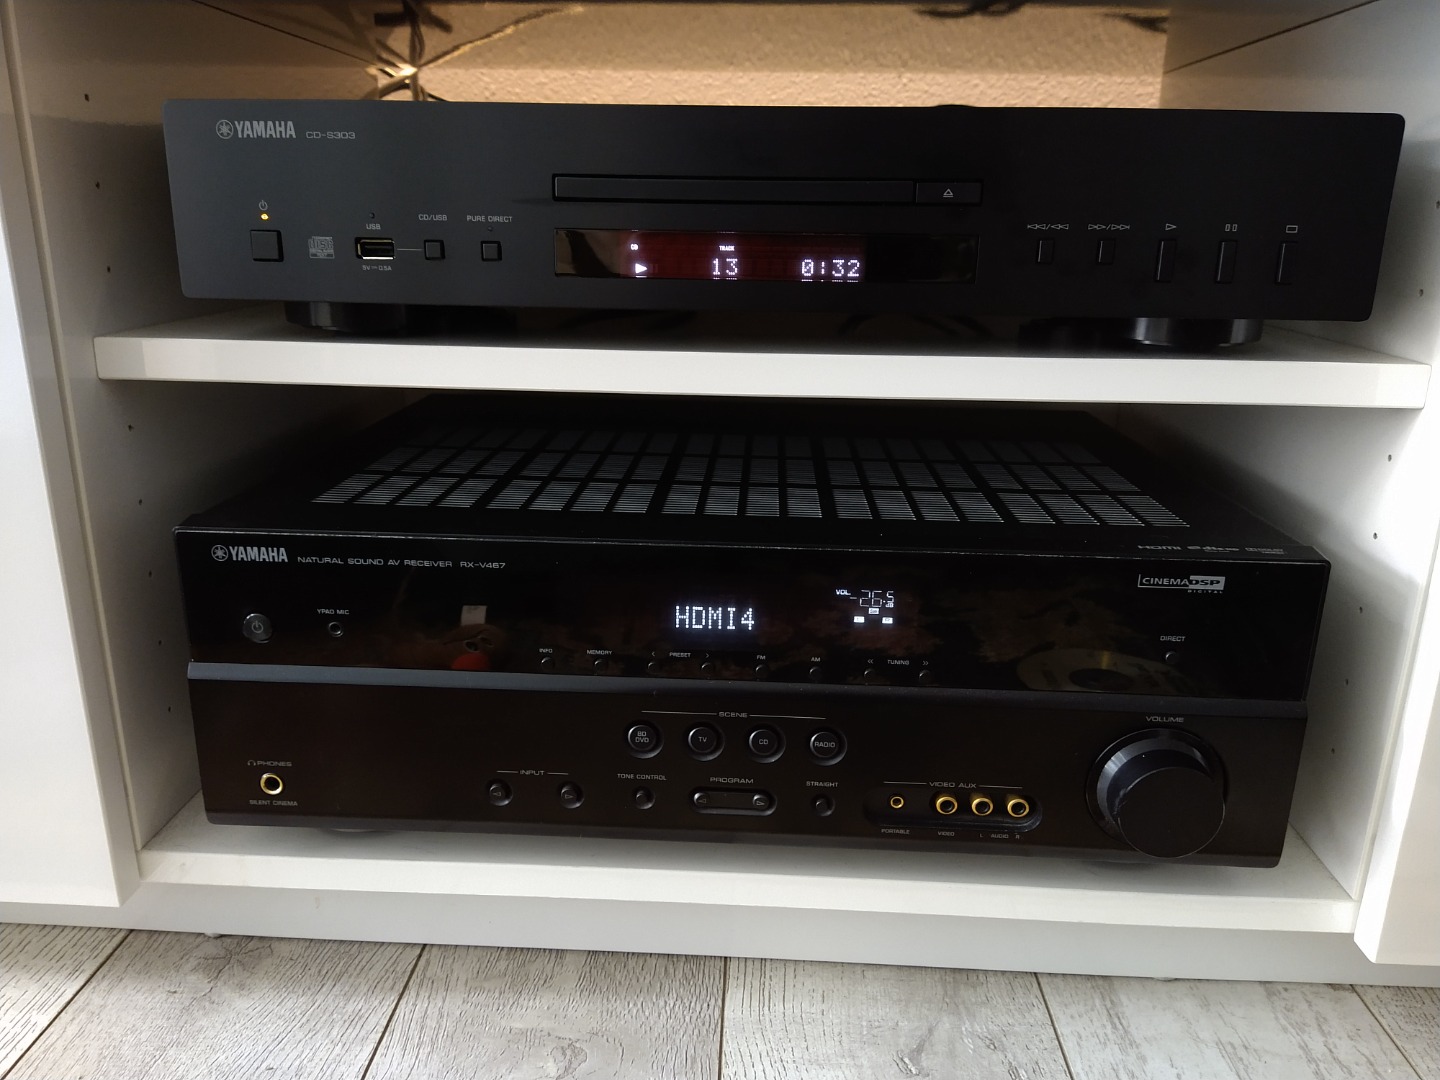 Customer Reviews: Yamaha CD-S303 Single-disc CD player with front